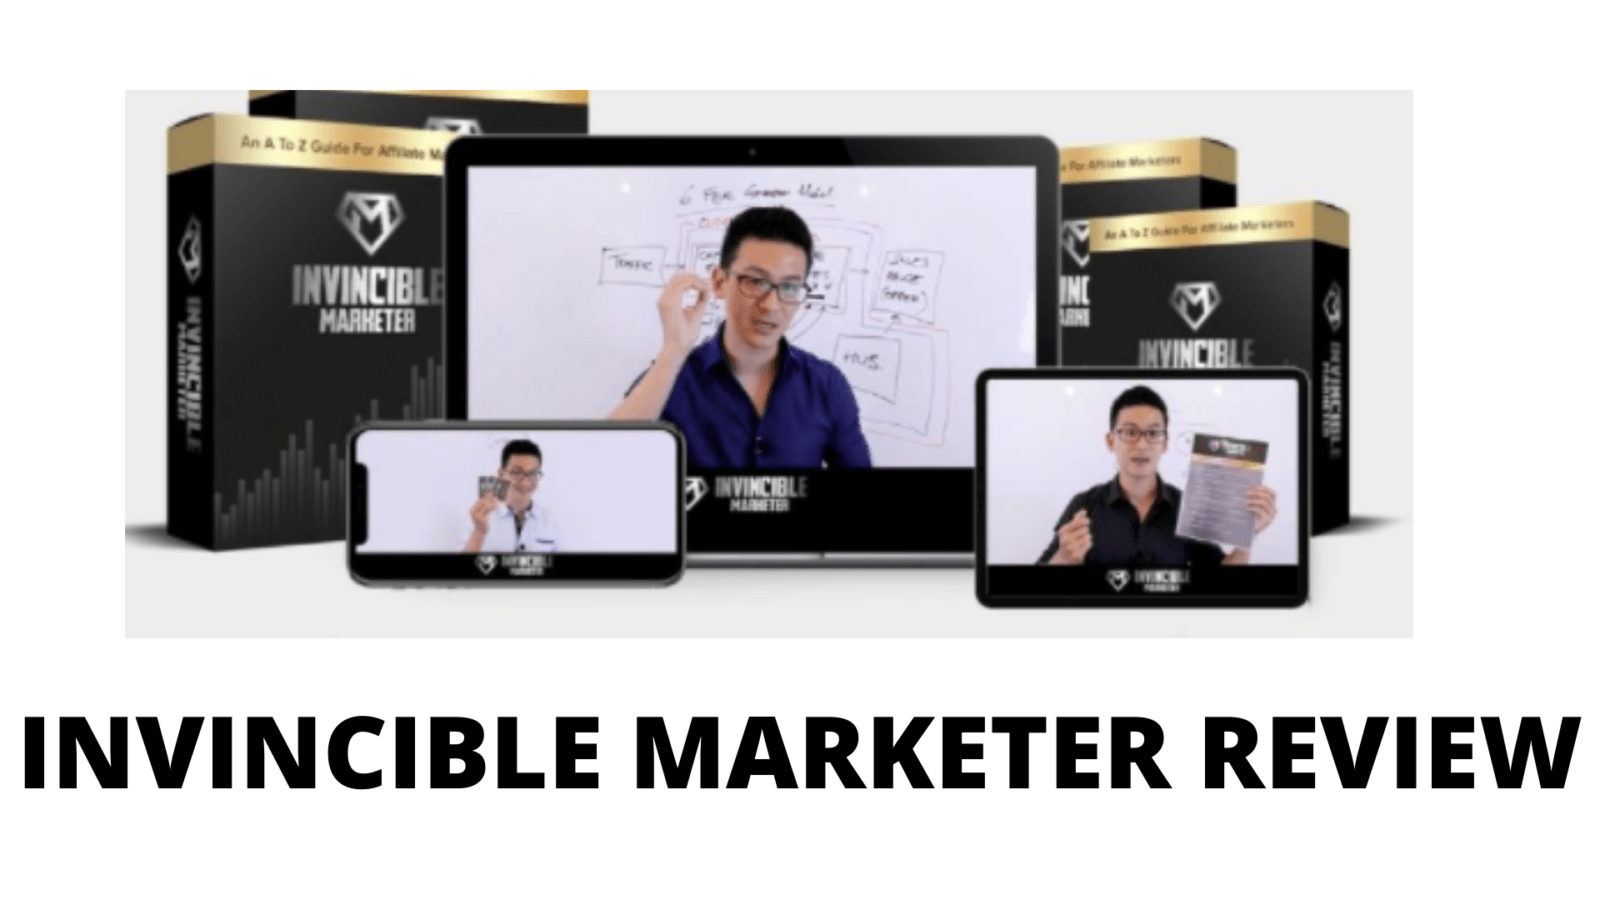 Invincible marketer Review